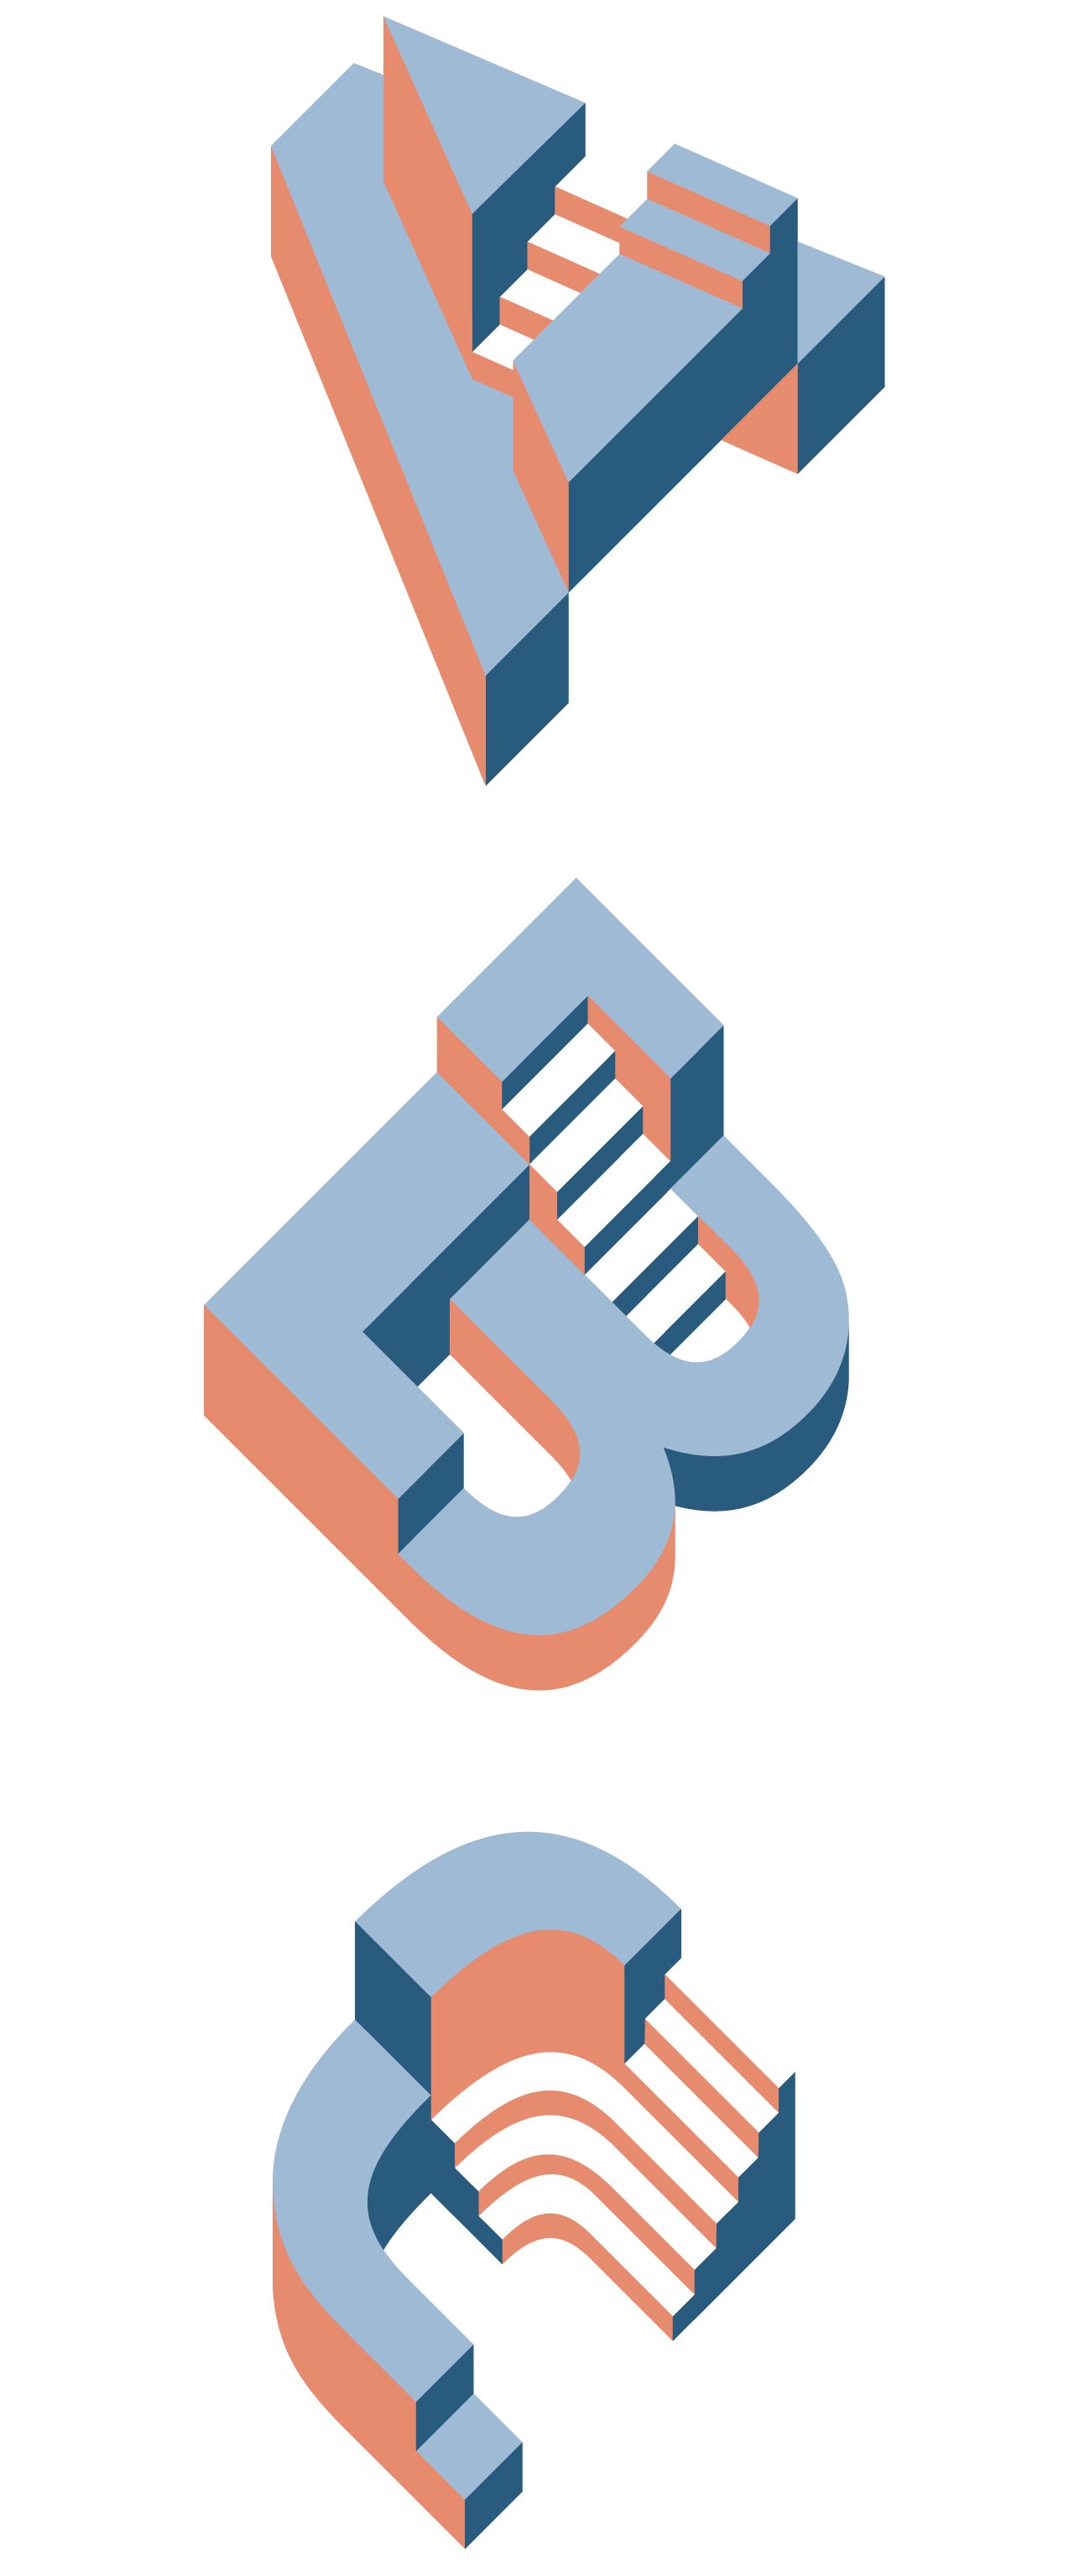 Isometric illustrations ofthe letters A, B and C